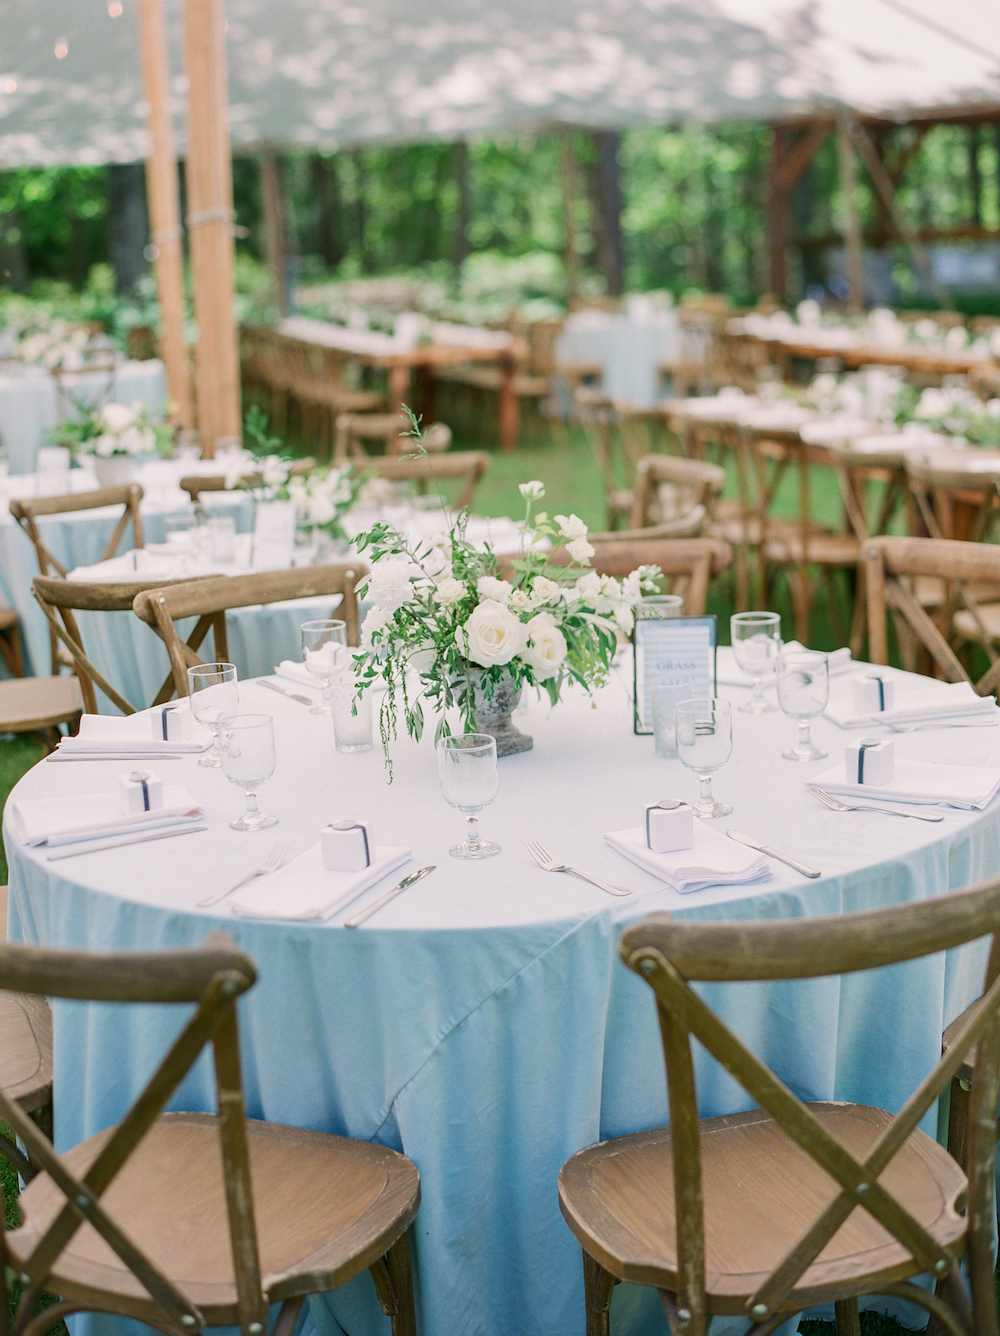 Tables set for a tented wedding in Glen Arbor, Michigan